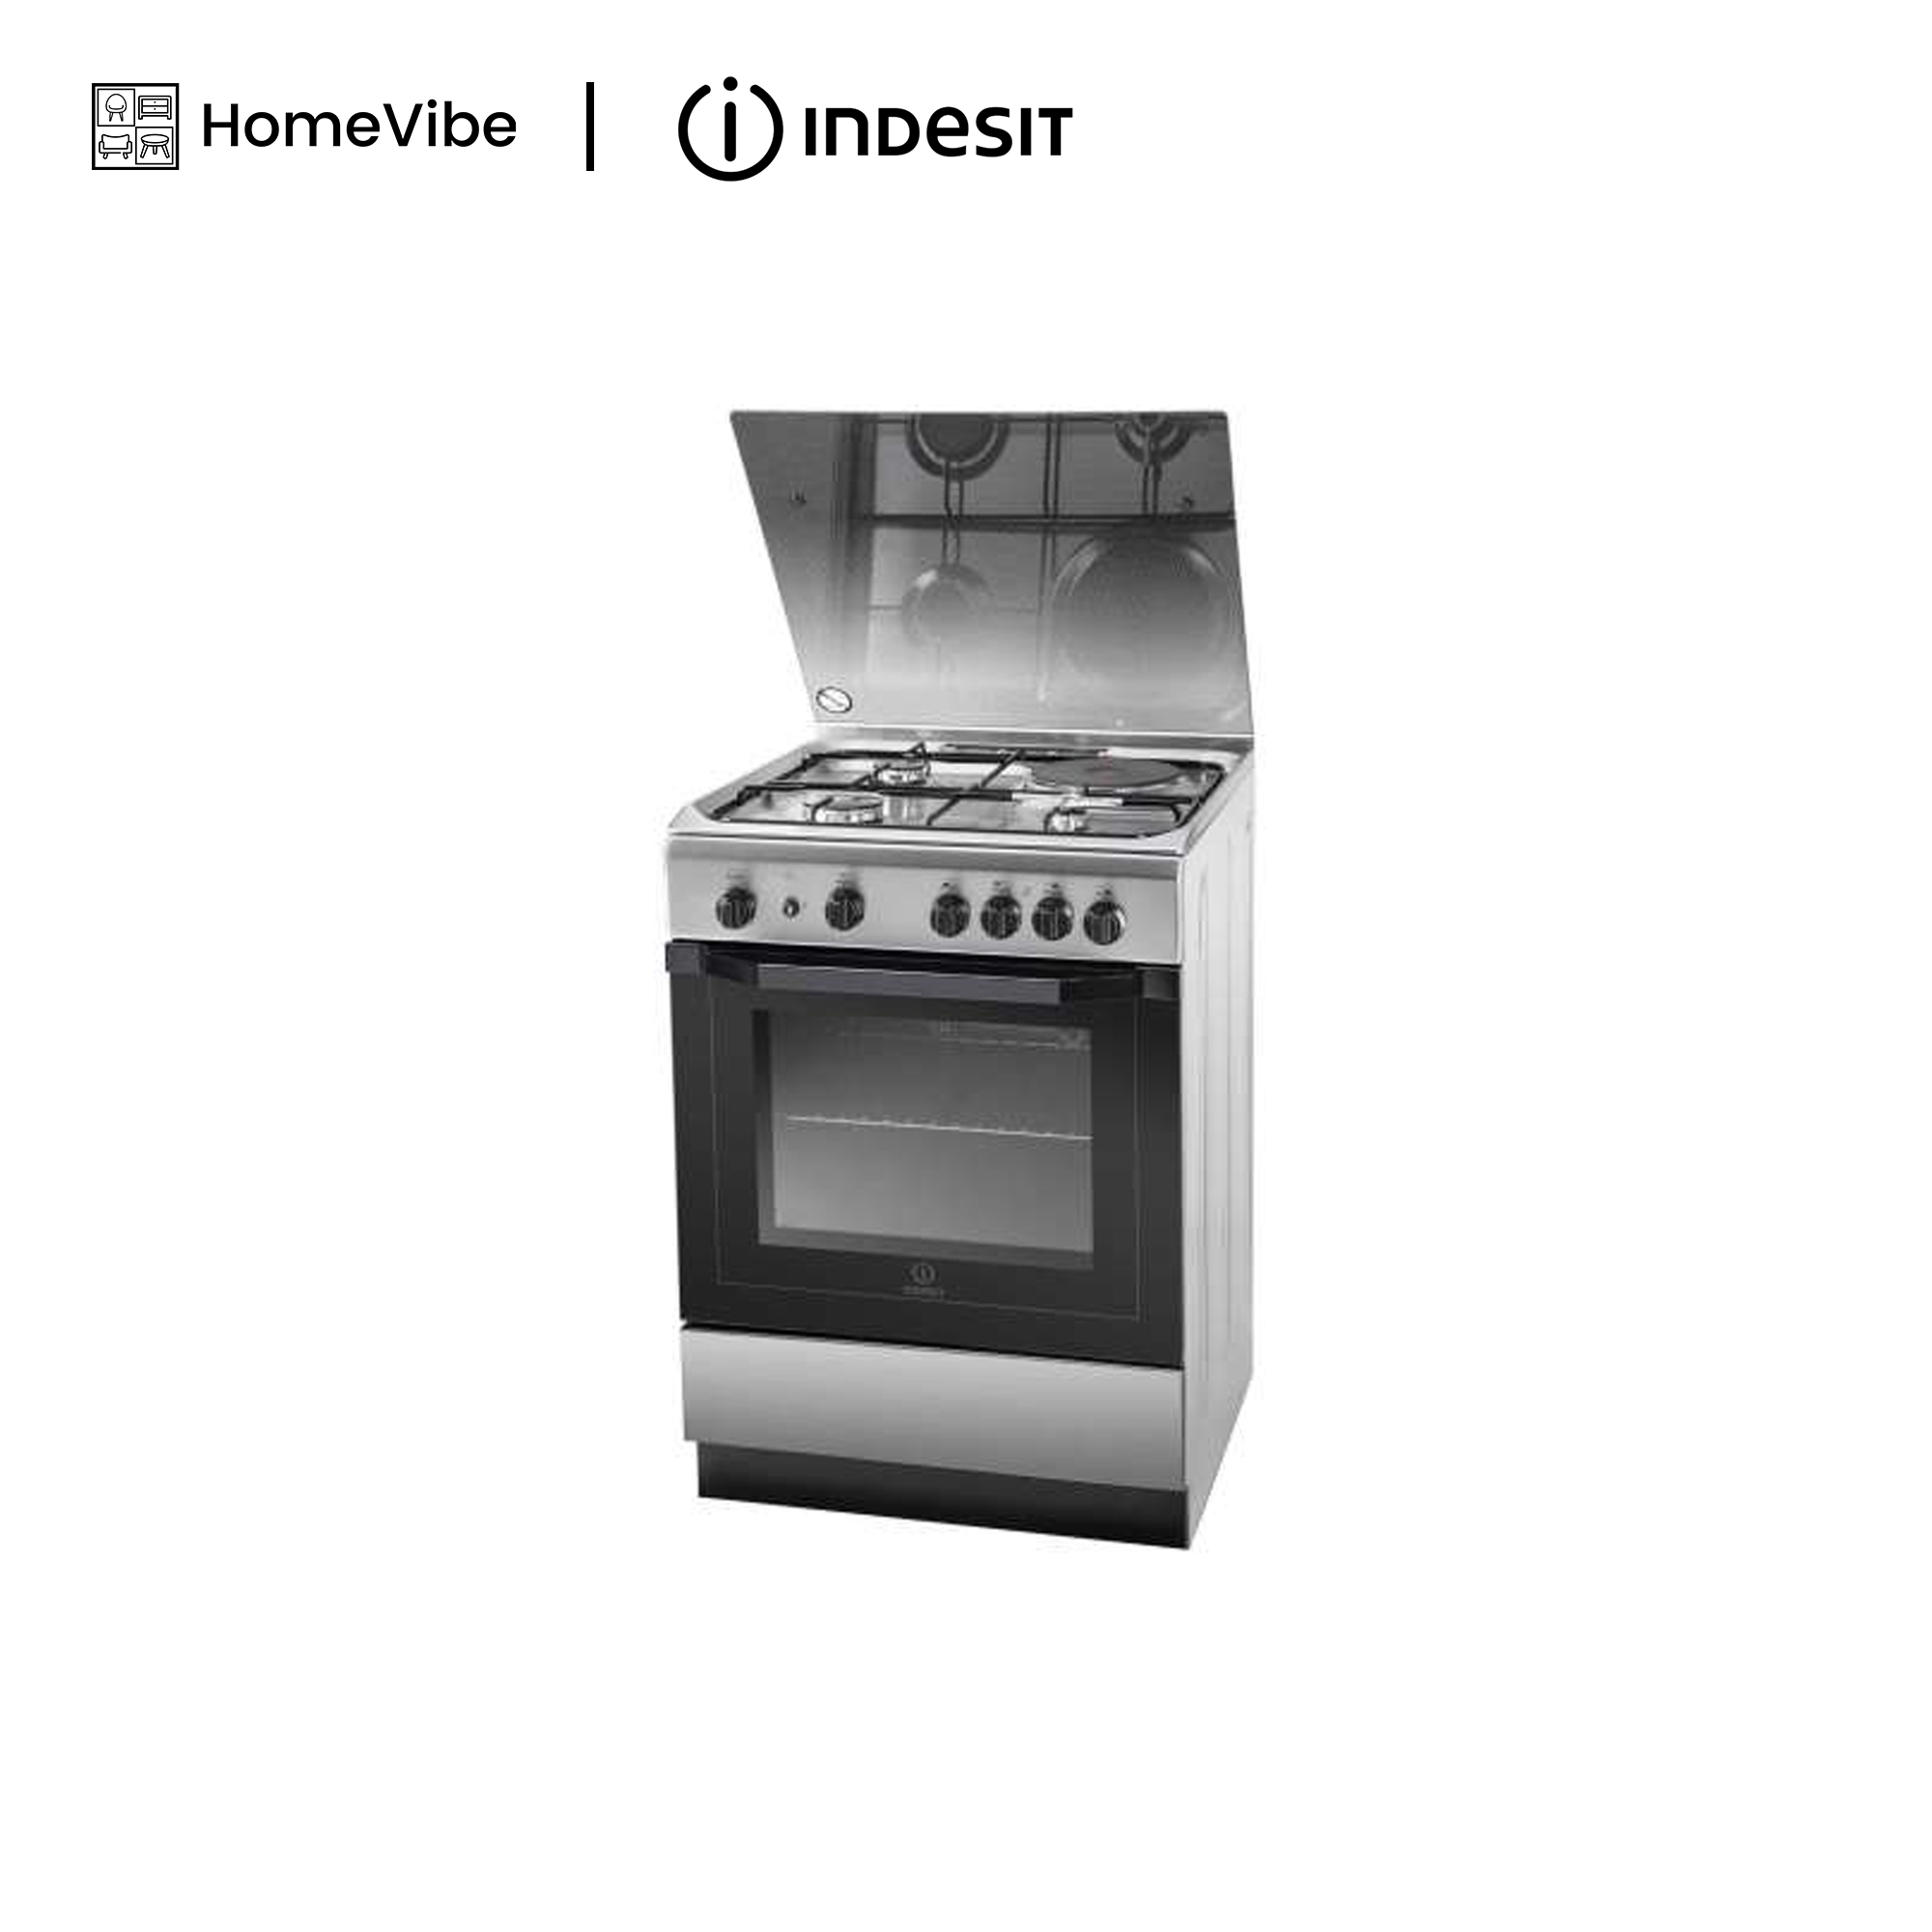 Indesit 60cm, 3 Gas Burners + 1 Electric plate + Gas Oven Free Standing Cooker I6MG1G(X)EX